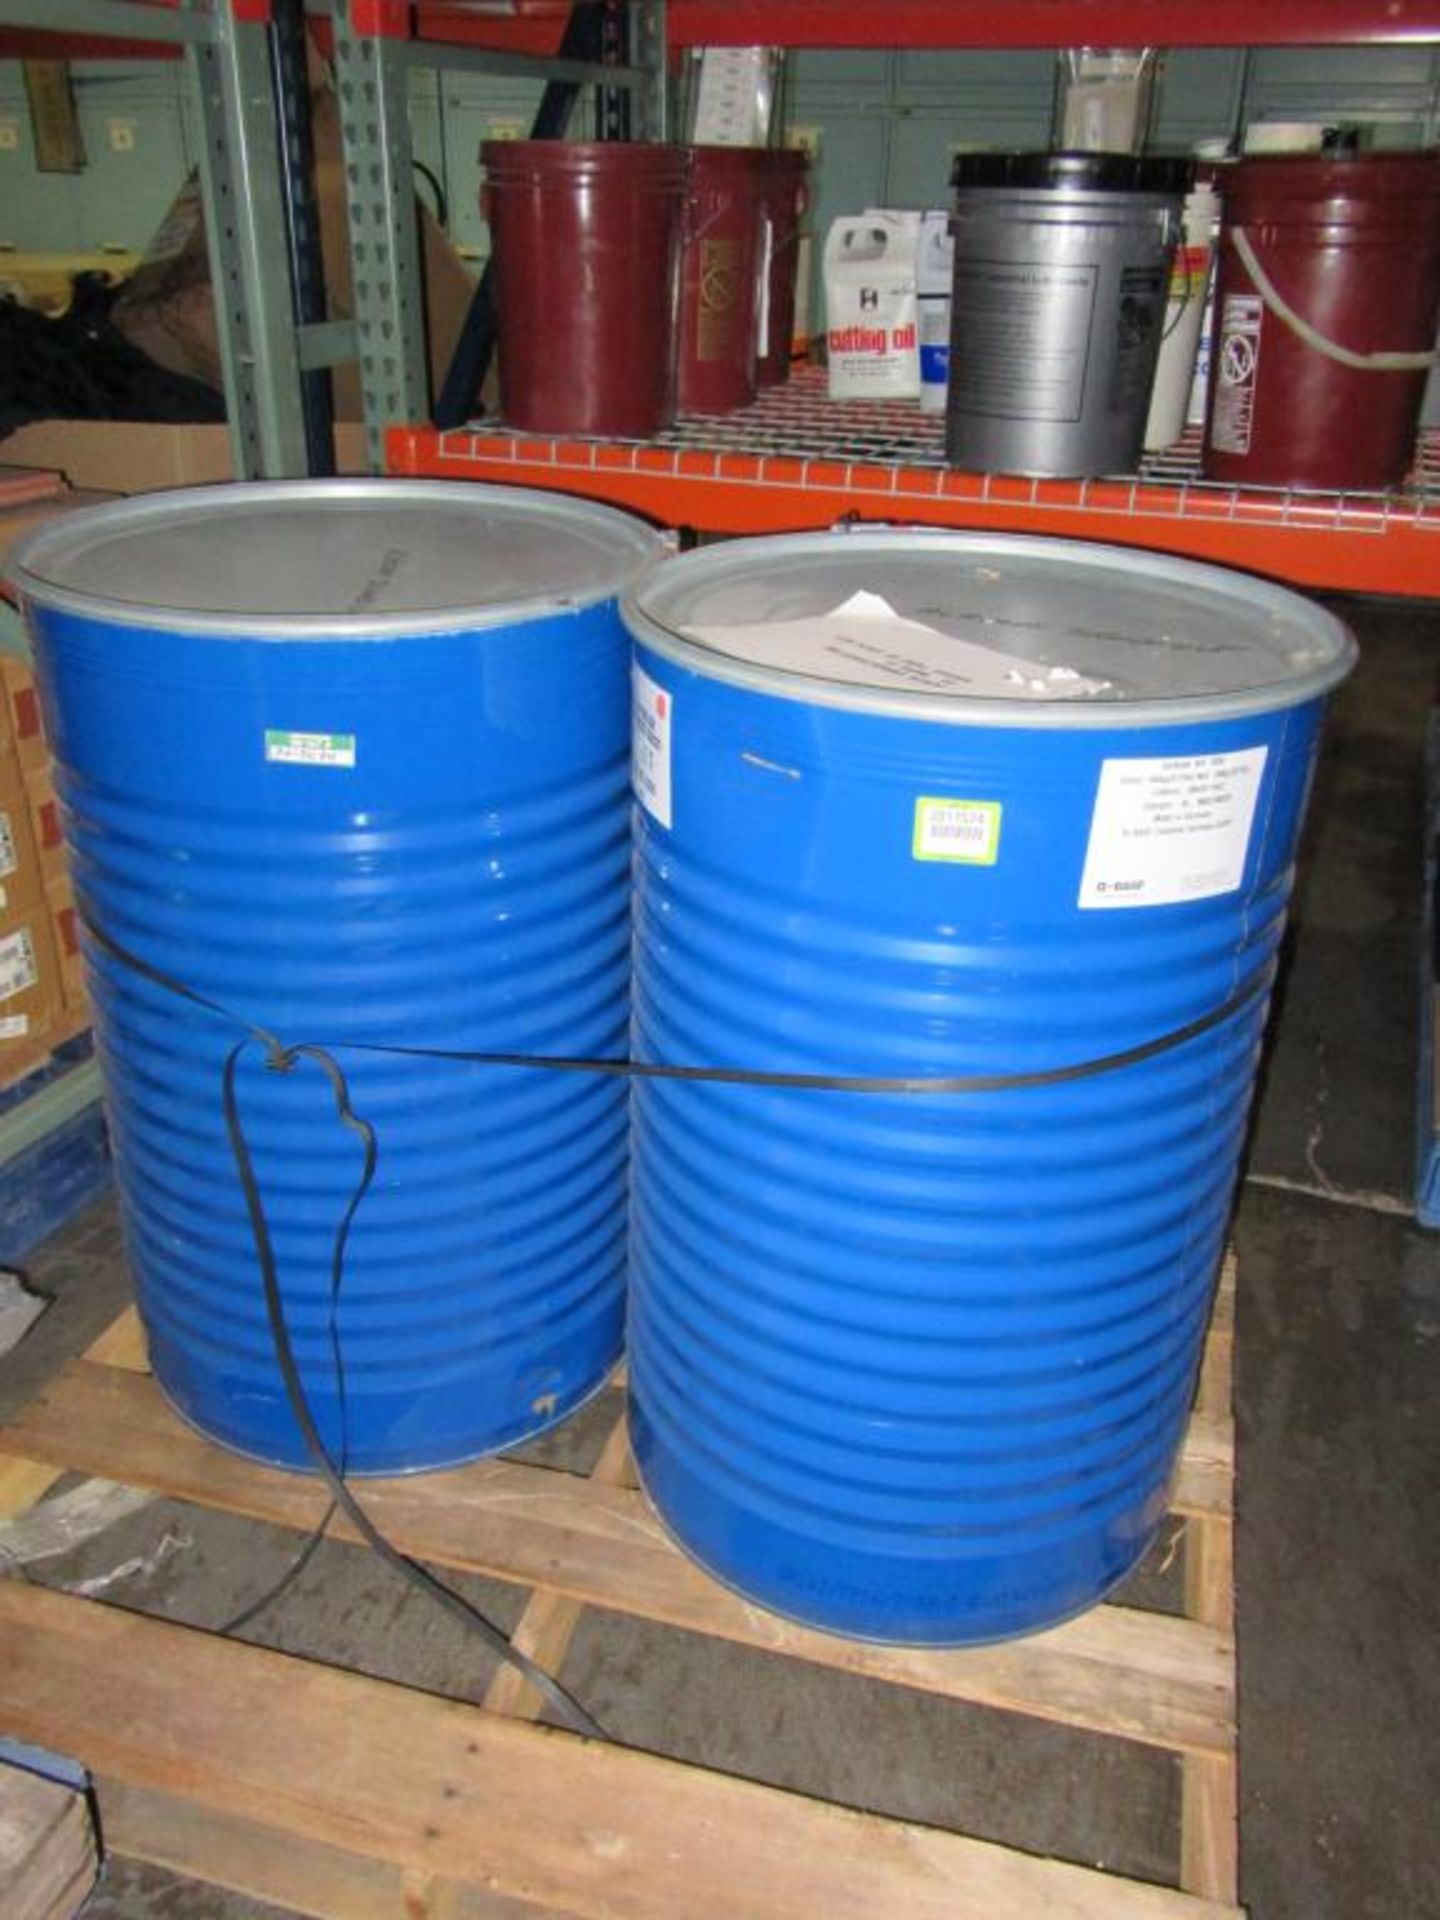 Sorbead WS 2050; Lot: (2) Sealed 55-Gallon Drums of Sorbead WS 2050. HIT# 2217574. Loc: Maintenance